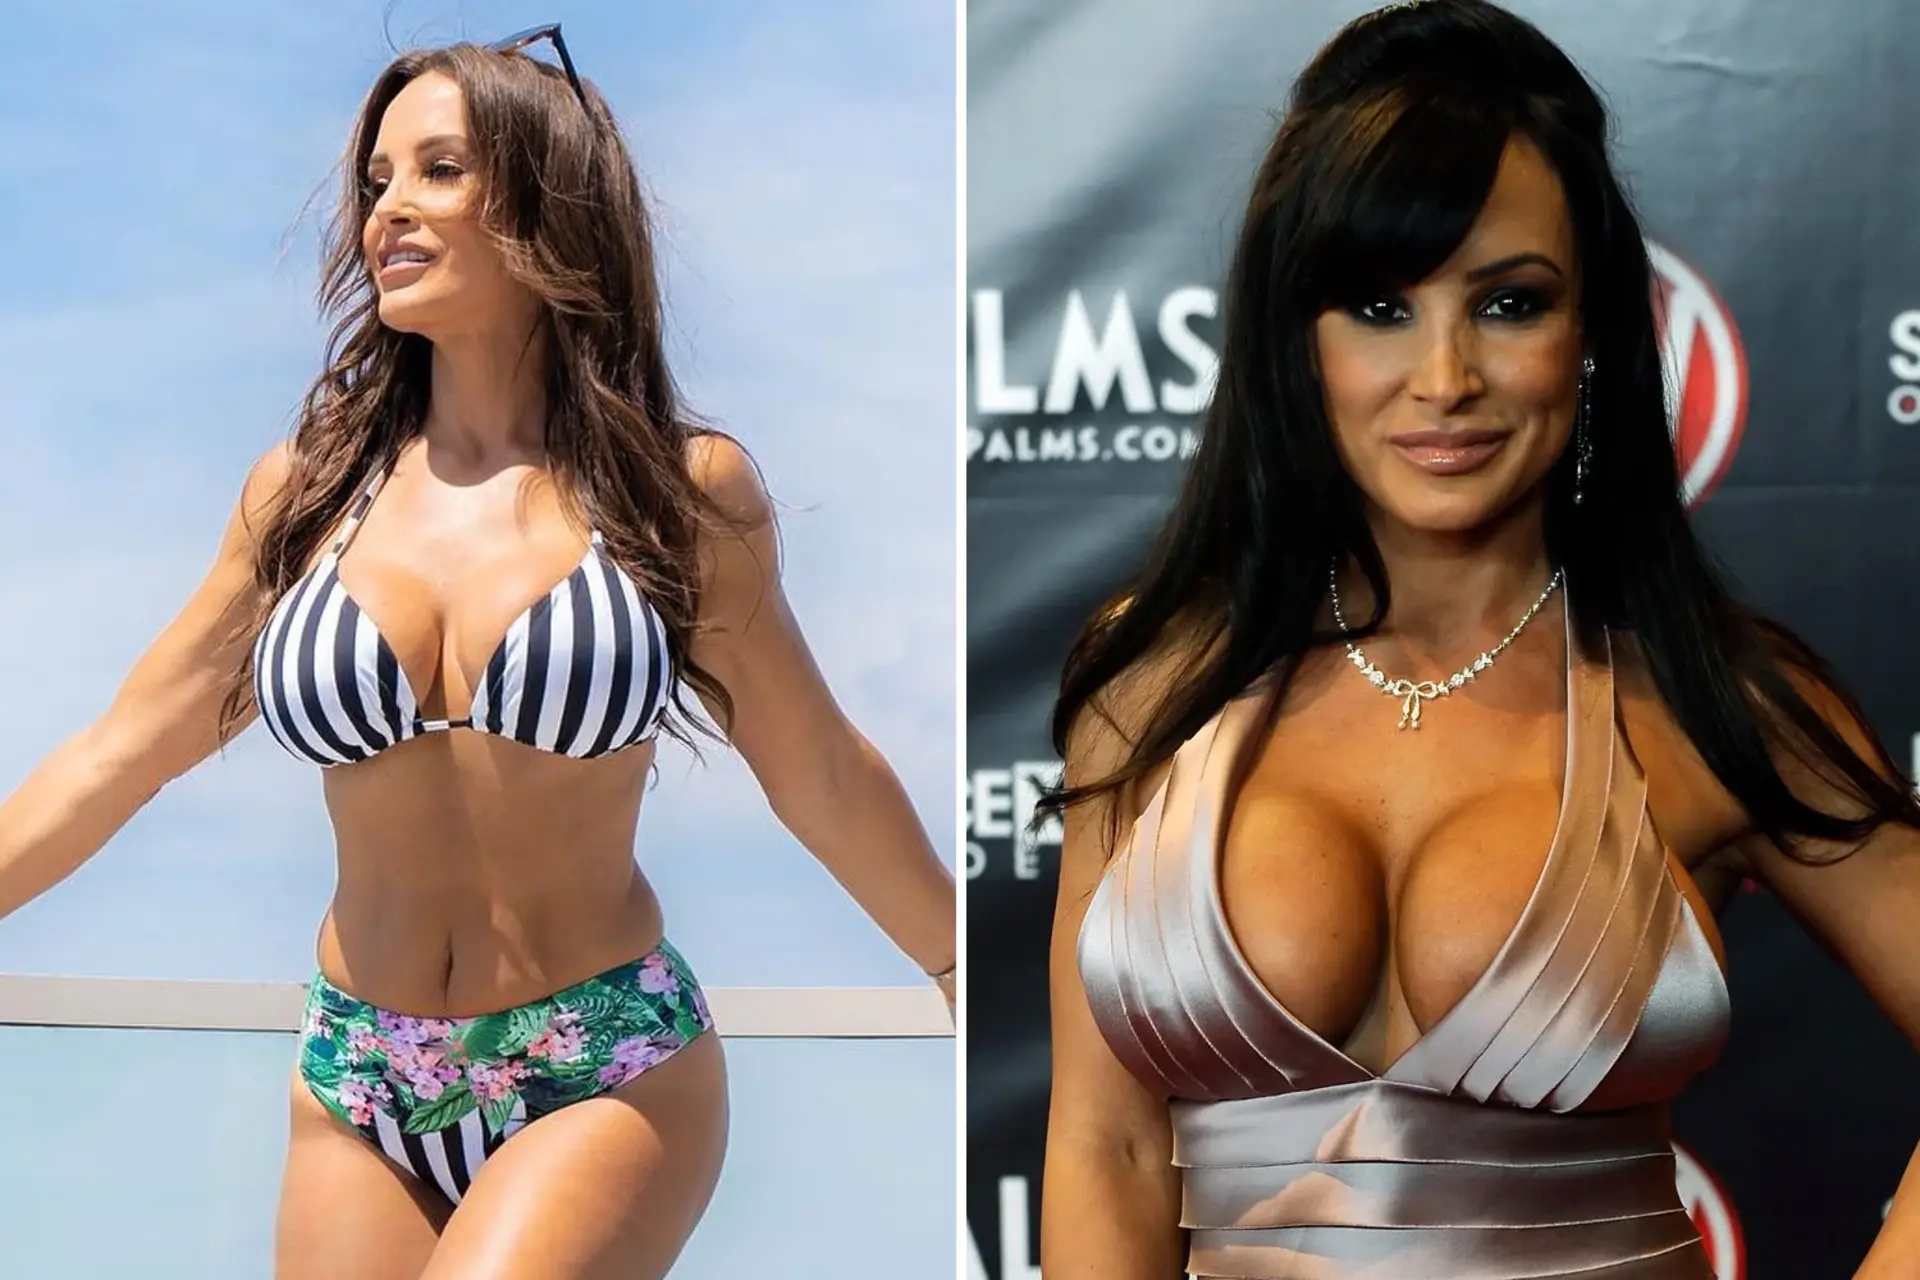 denicia taylor recommends lisa ann green dress pic